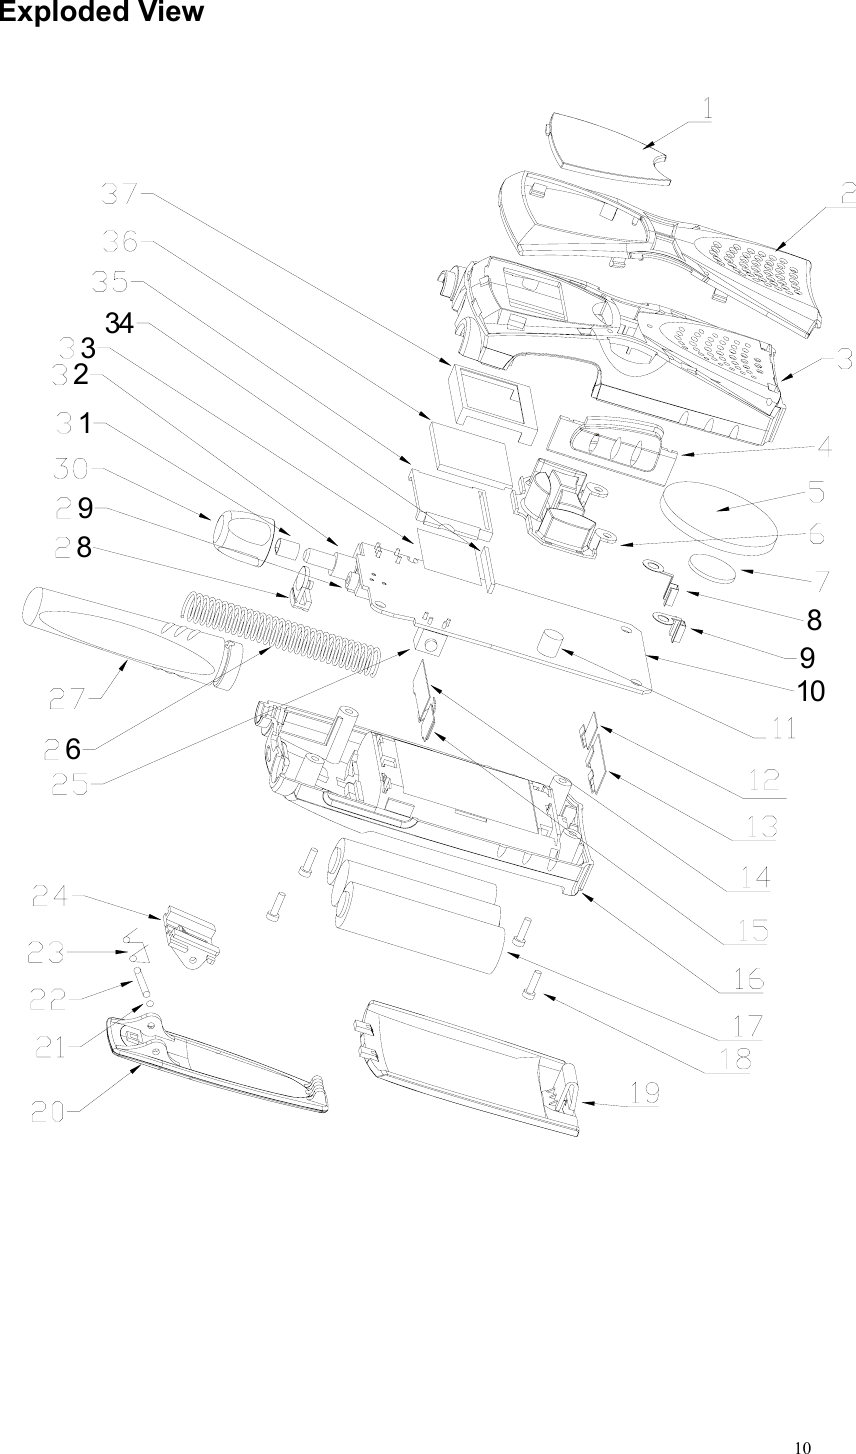  10Exploded View 968341321089     